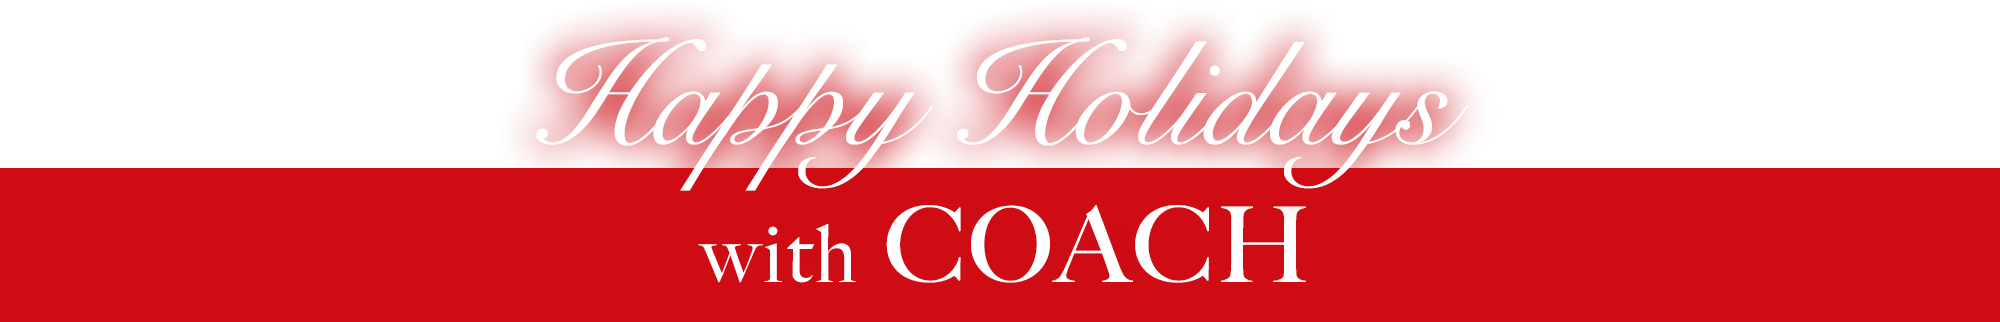 Happy Holidays with COACH